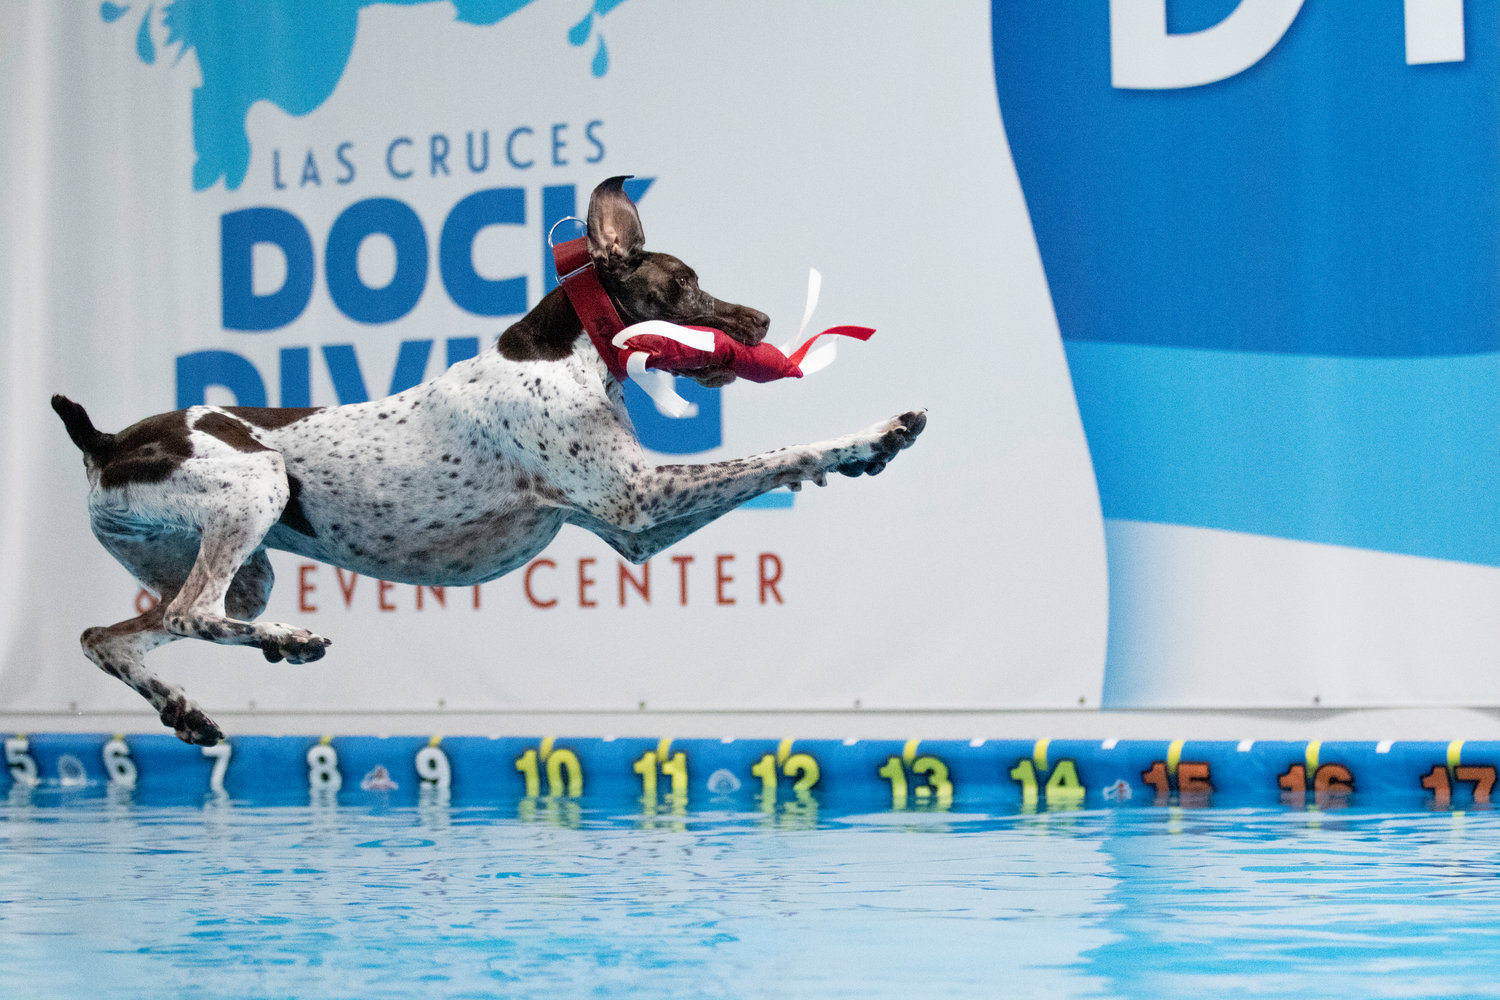 Axel is a GSP (German Shorthaired Pointer) who lives in Glendale, Arizona and belongs to Laura Nagy. He is participating in an Air Retrieve event at Las Cruces Dock Diving.